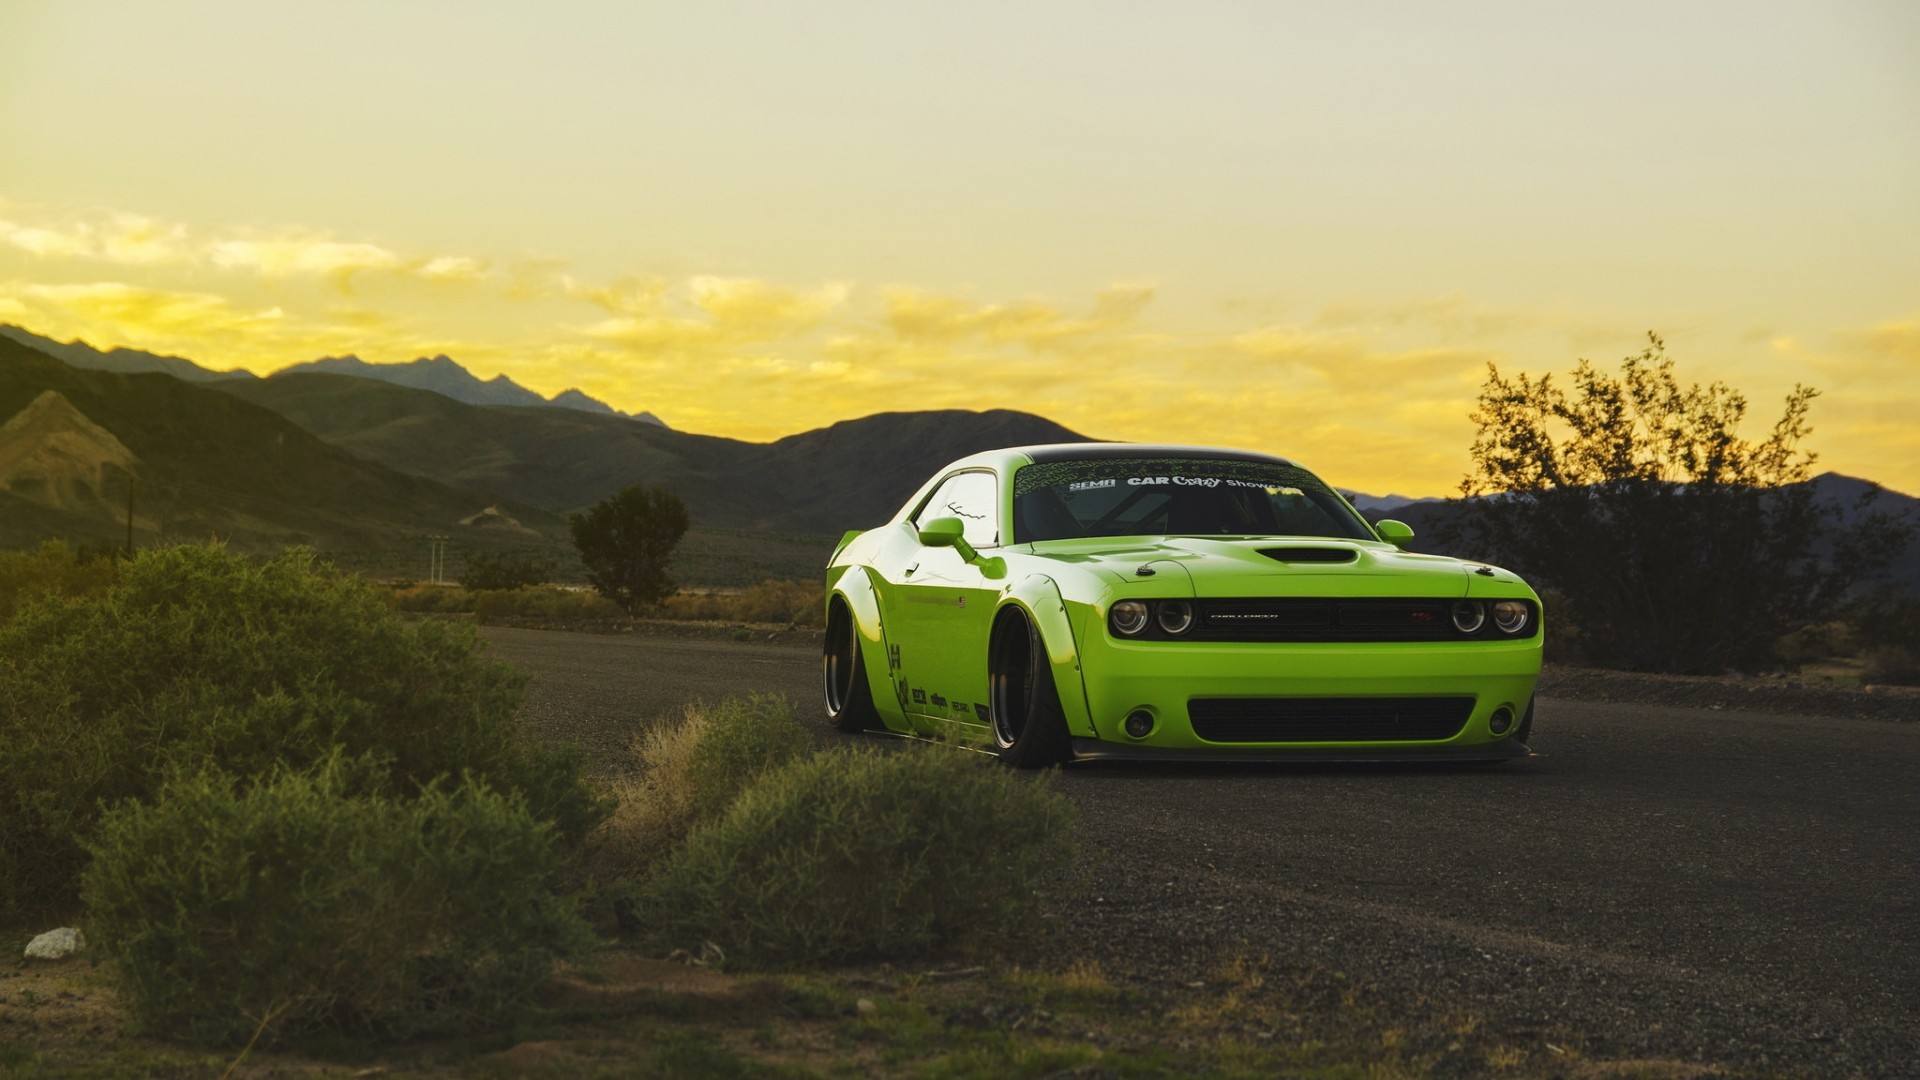 General 1920x1080 Dodge Challenger Dodge green cars muscle cars sunset car vehicle outdoors landscape American cars Stellantis